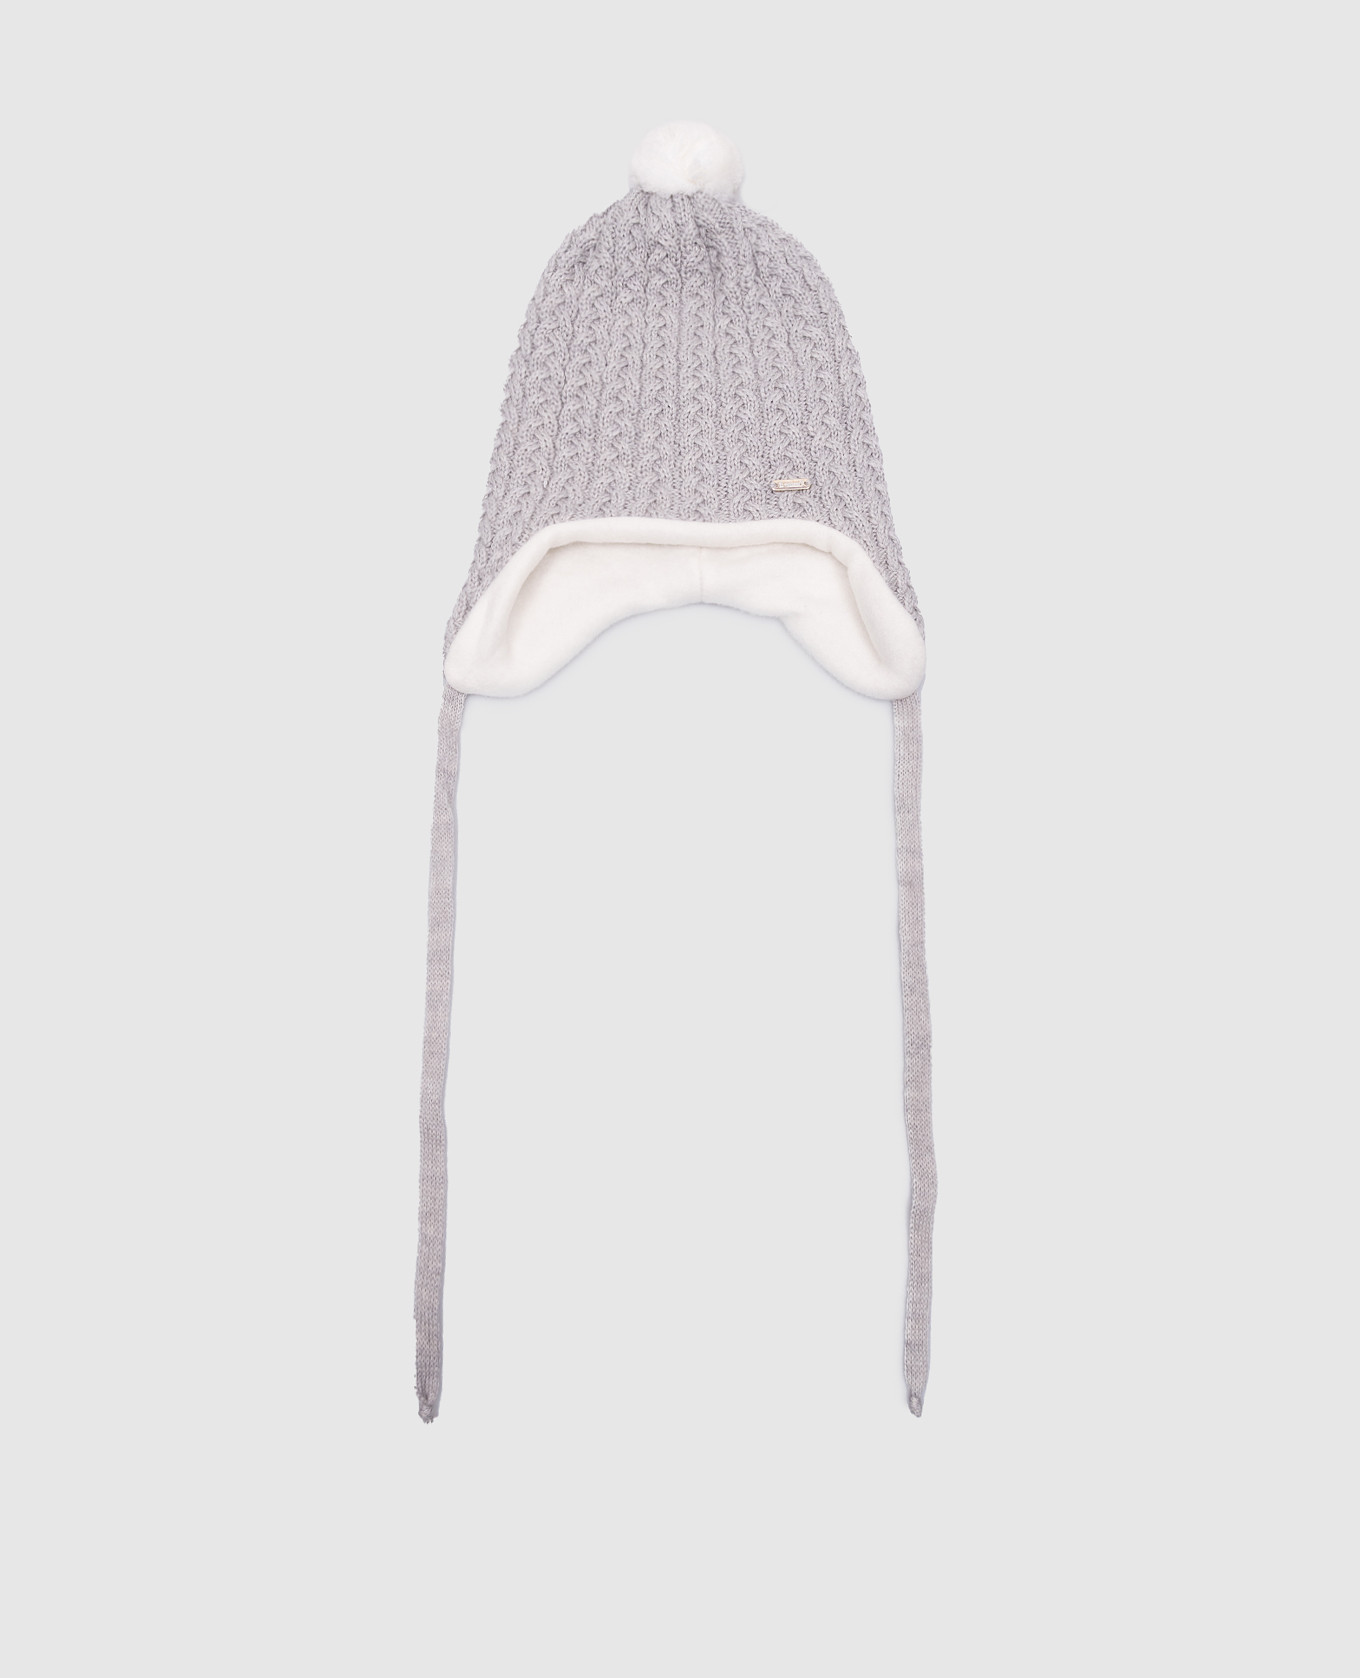 Children's gray hat made of wool with a textured pattern